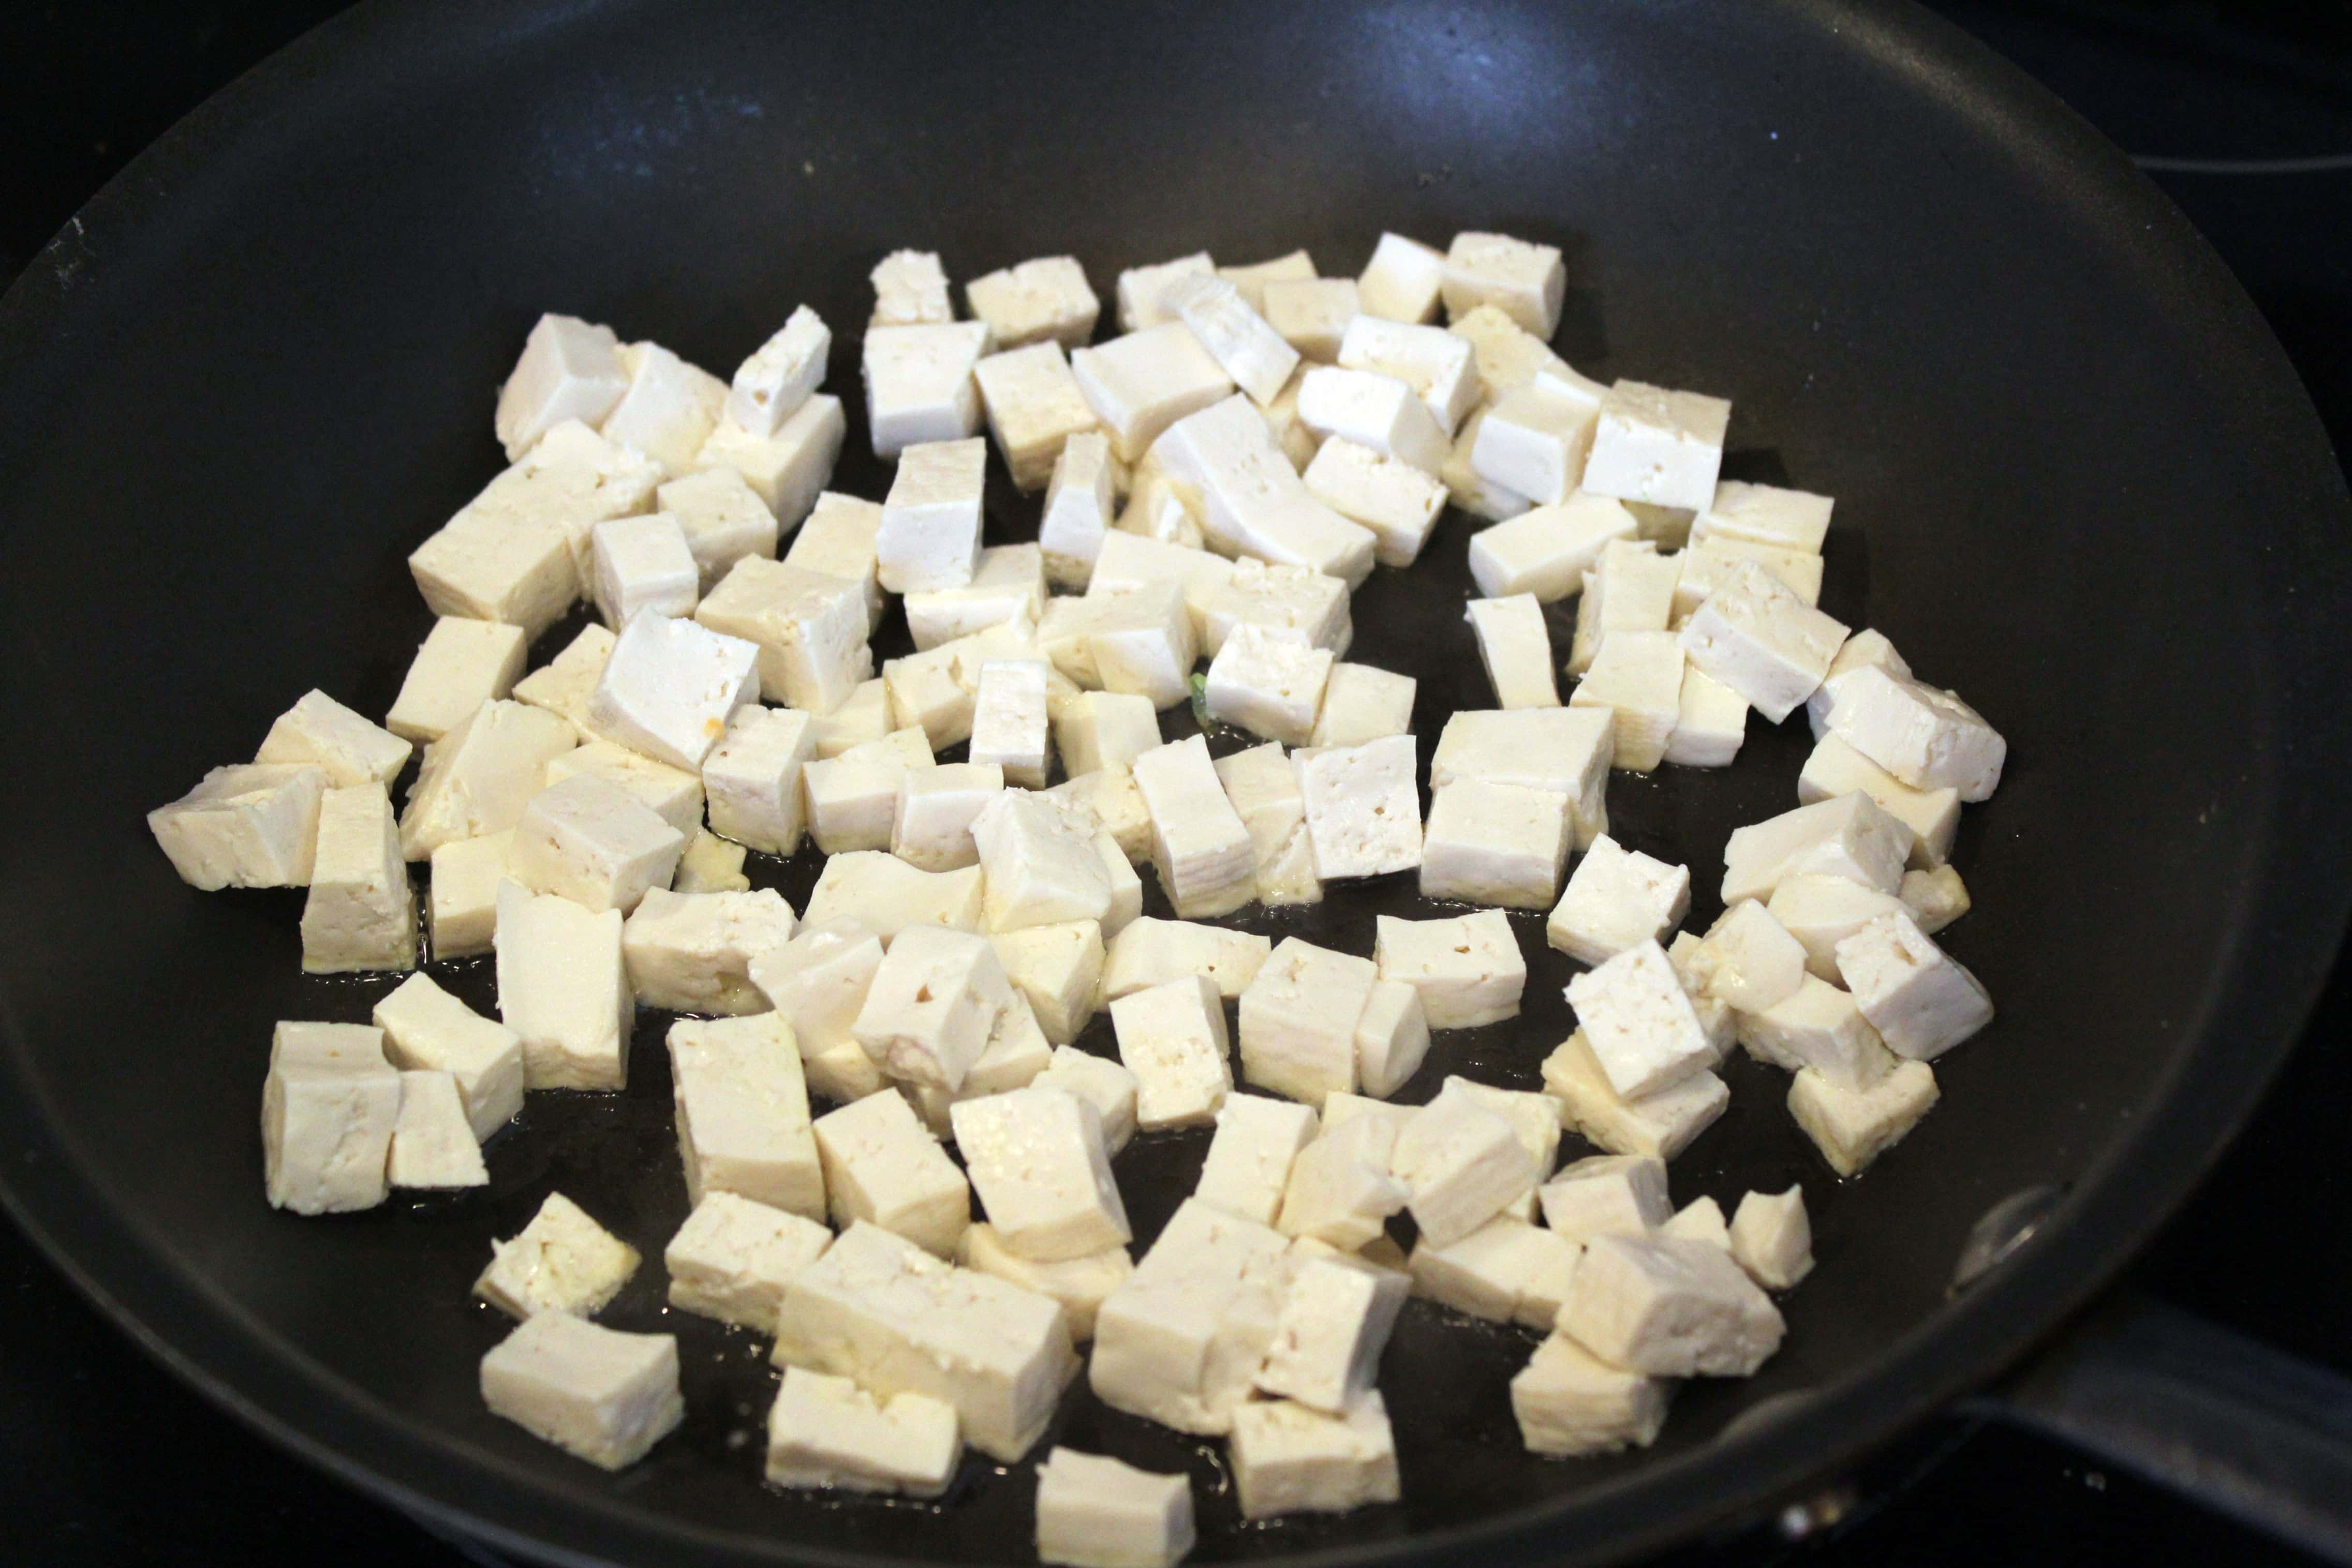 Start tofu gently in a hot pan